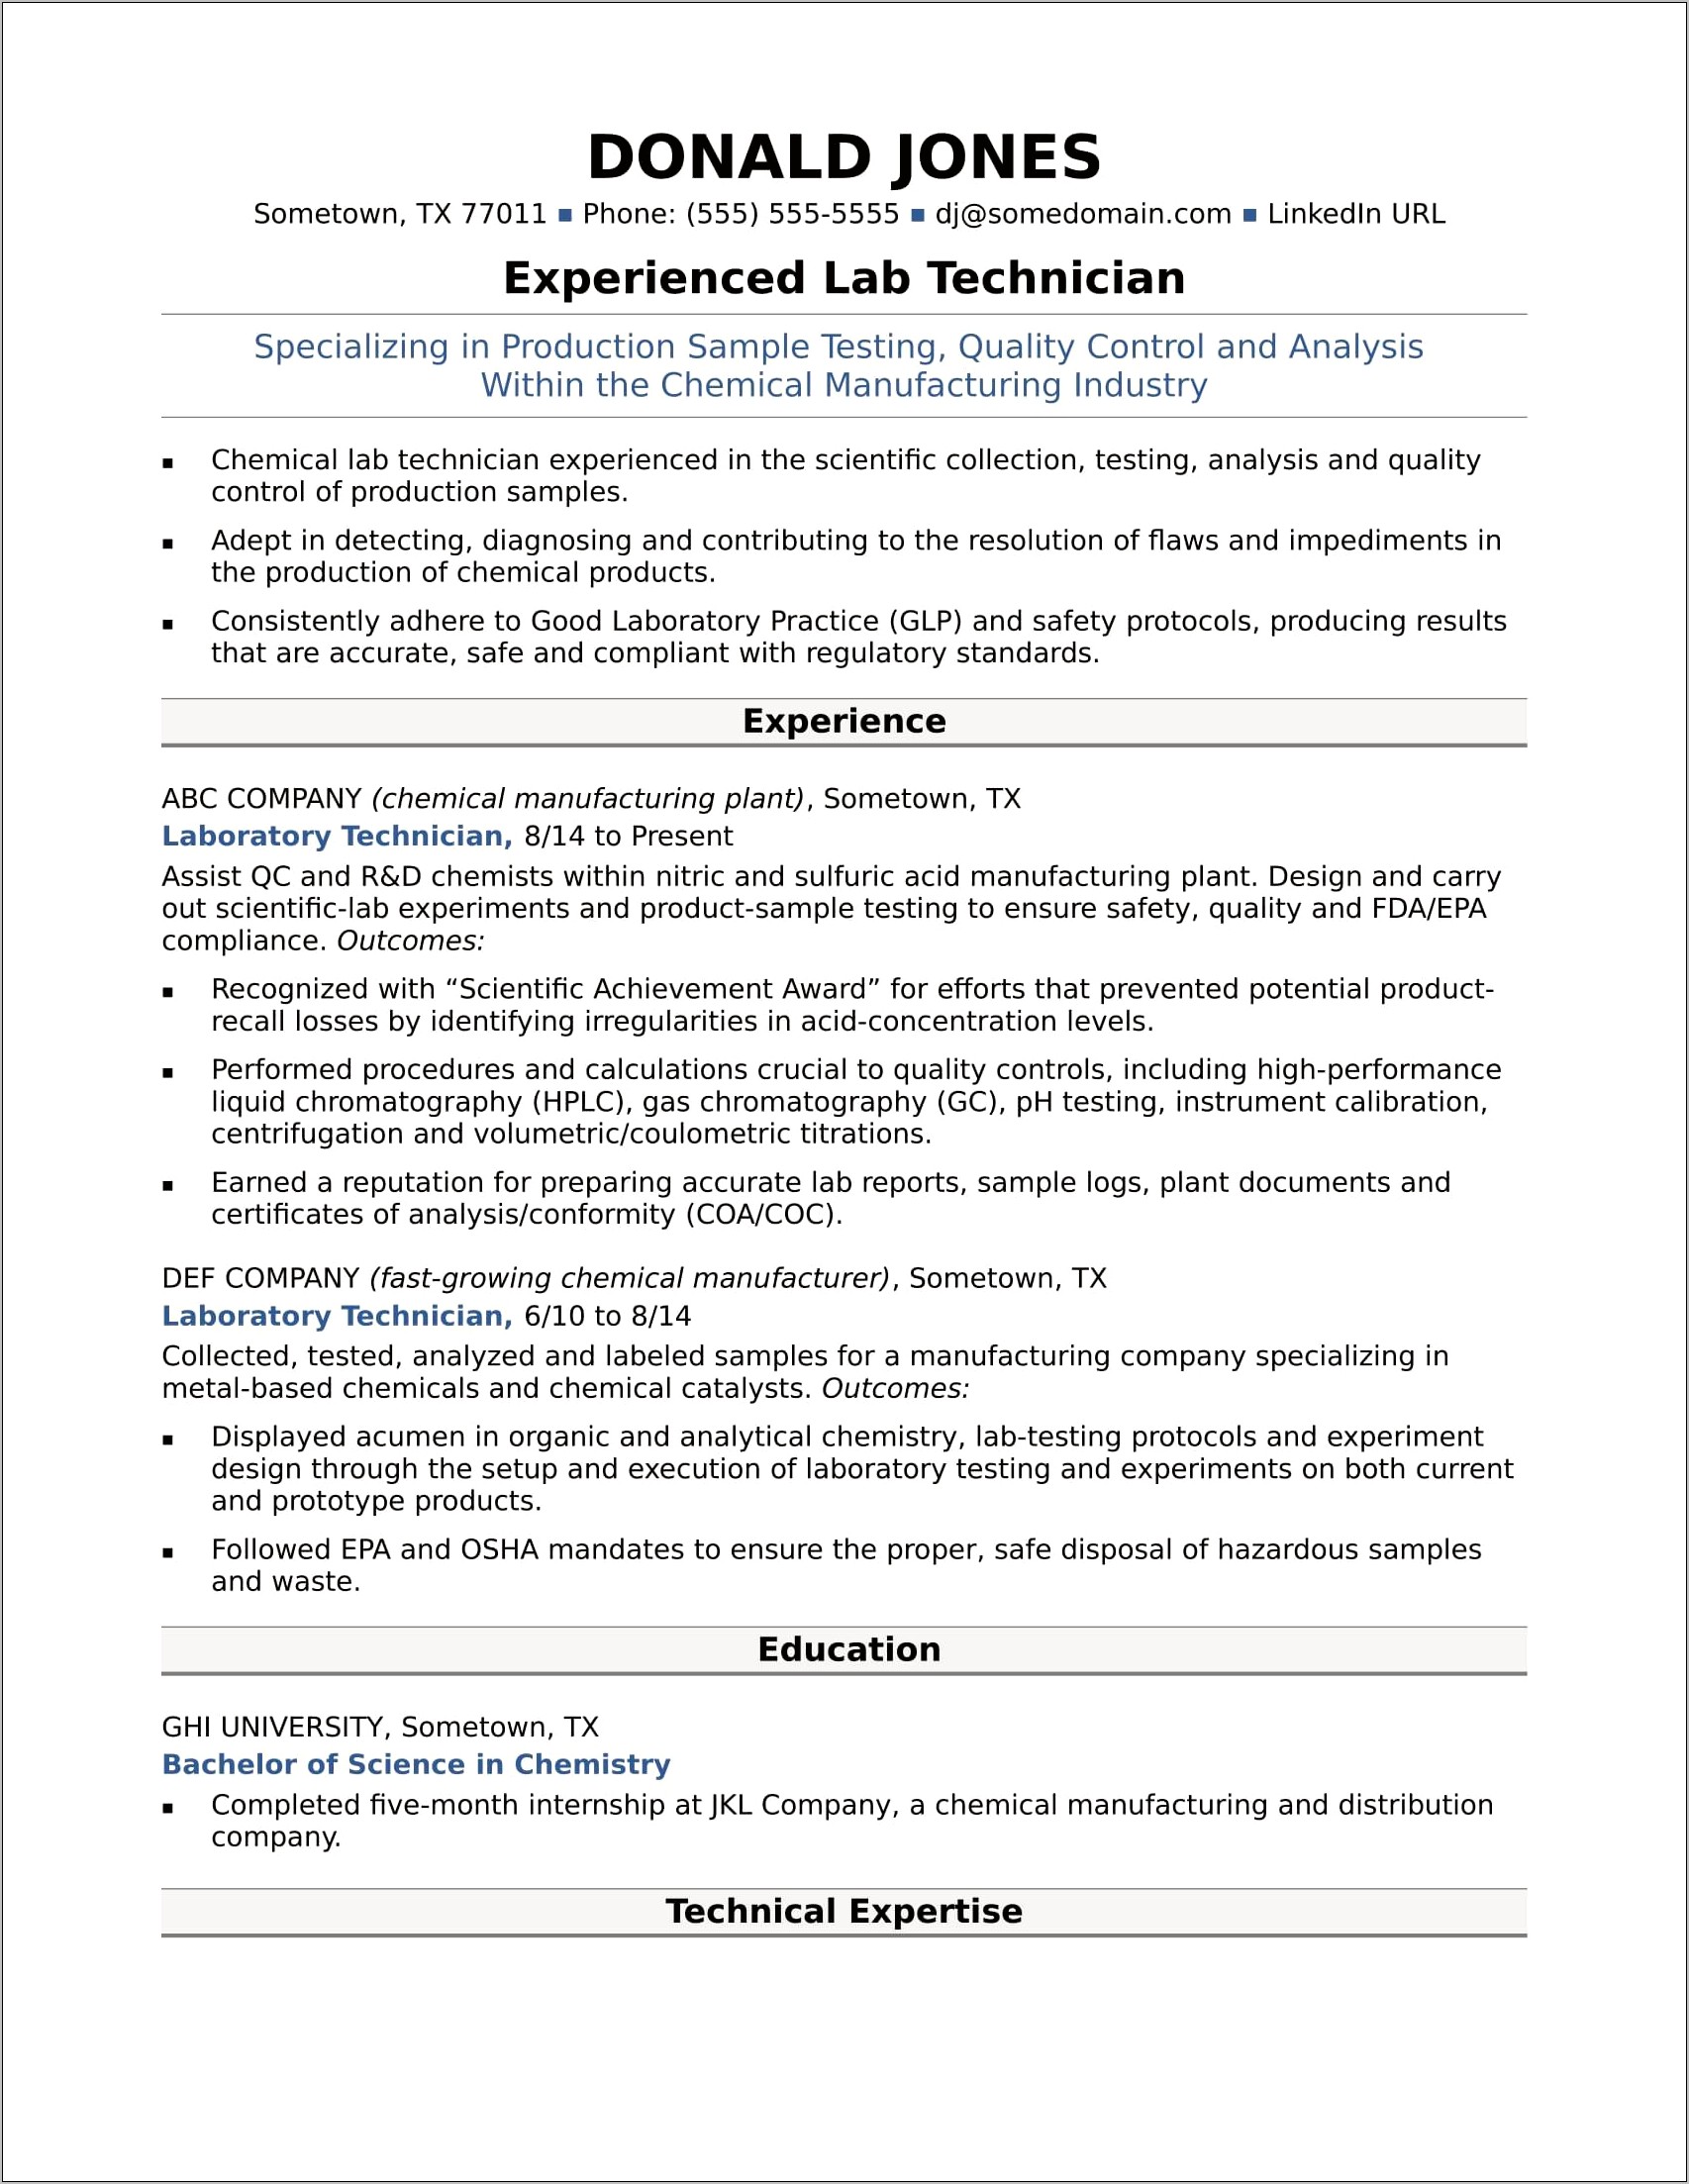 Lab Techniques To Put On Resume